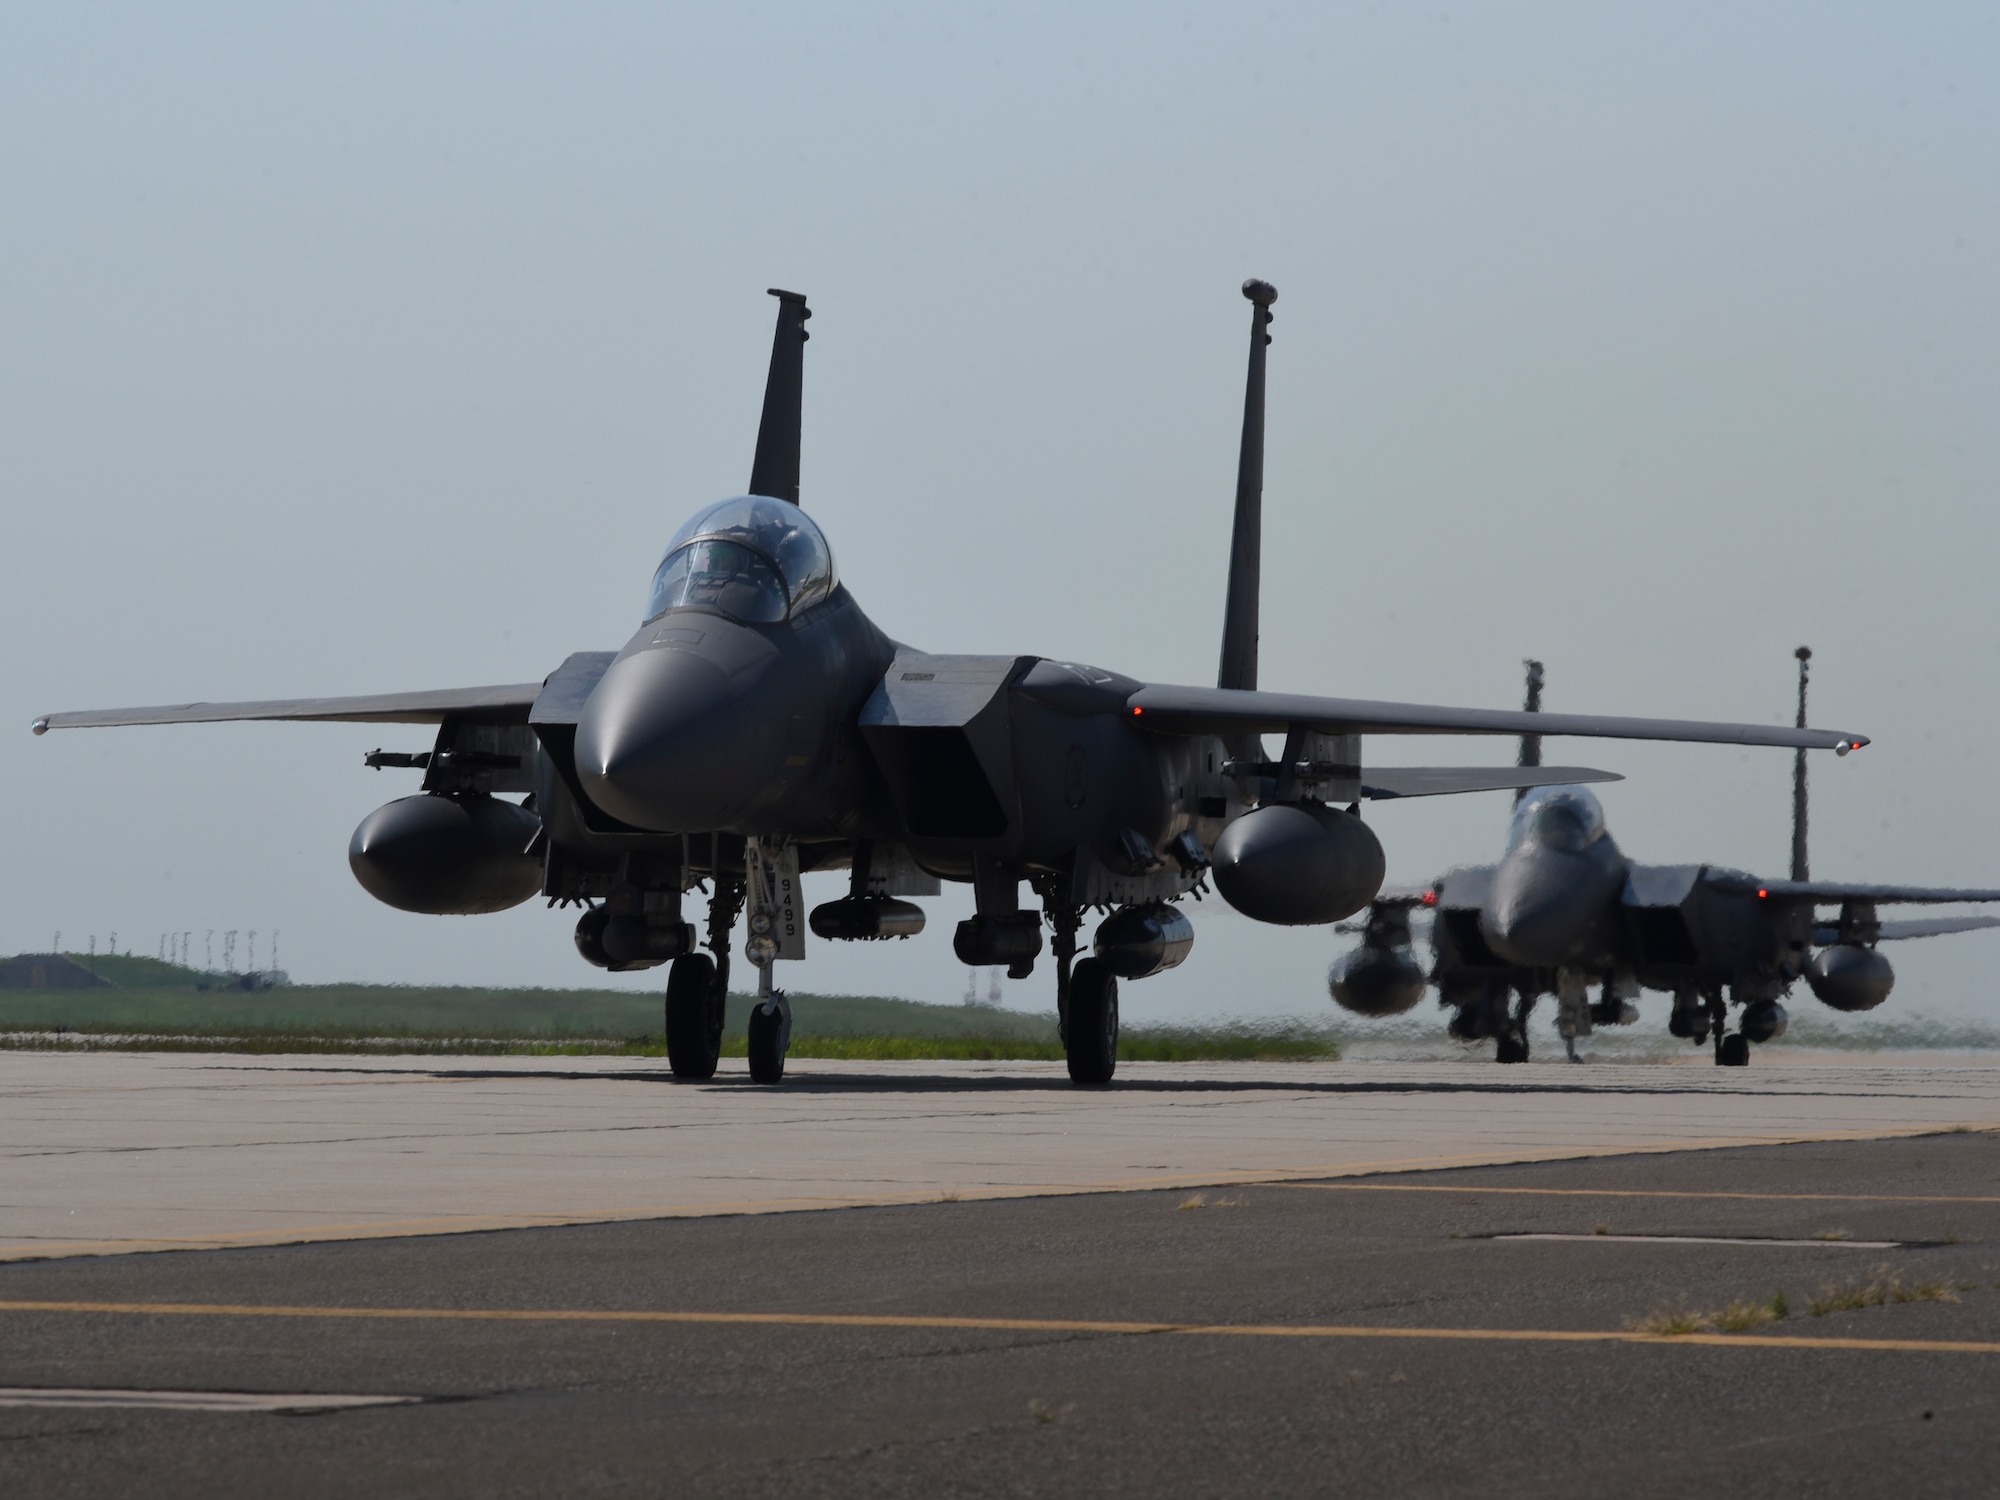 Three F-15E Strike Eagle aircraft from the 4th Fighter Wing, Seymour-Johnson Air Force Base, North Carolina, taxi at Tinker AFB, Oklahoma as part of a mass-relocation of vulnerable aircraft to escape Hurricane Dorian's path Sept. 4, 2019, Tinker AFB, Oklahoma. Team Tinker executed an existing agreement with Seymour-Johnson AFB, North Carolina and Warner-Robins AFB, Georgia to host fighters, tankers and reconnaissance aircraft far away from the devastating hurricane currently impacting the East Coast of the United States. (U.S. Air Force photo/Greg L. Davis)